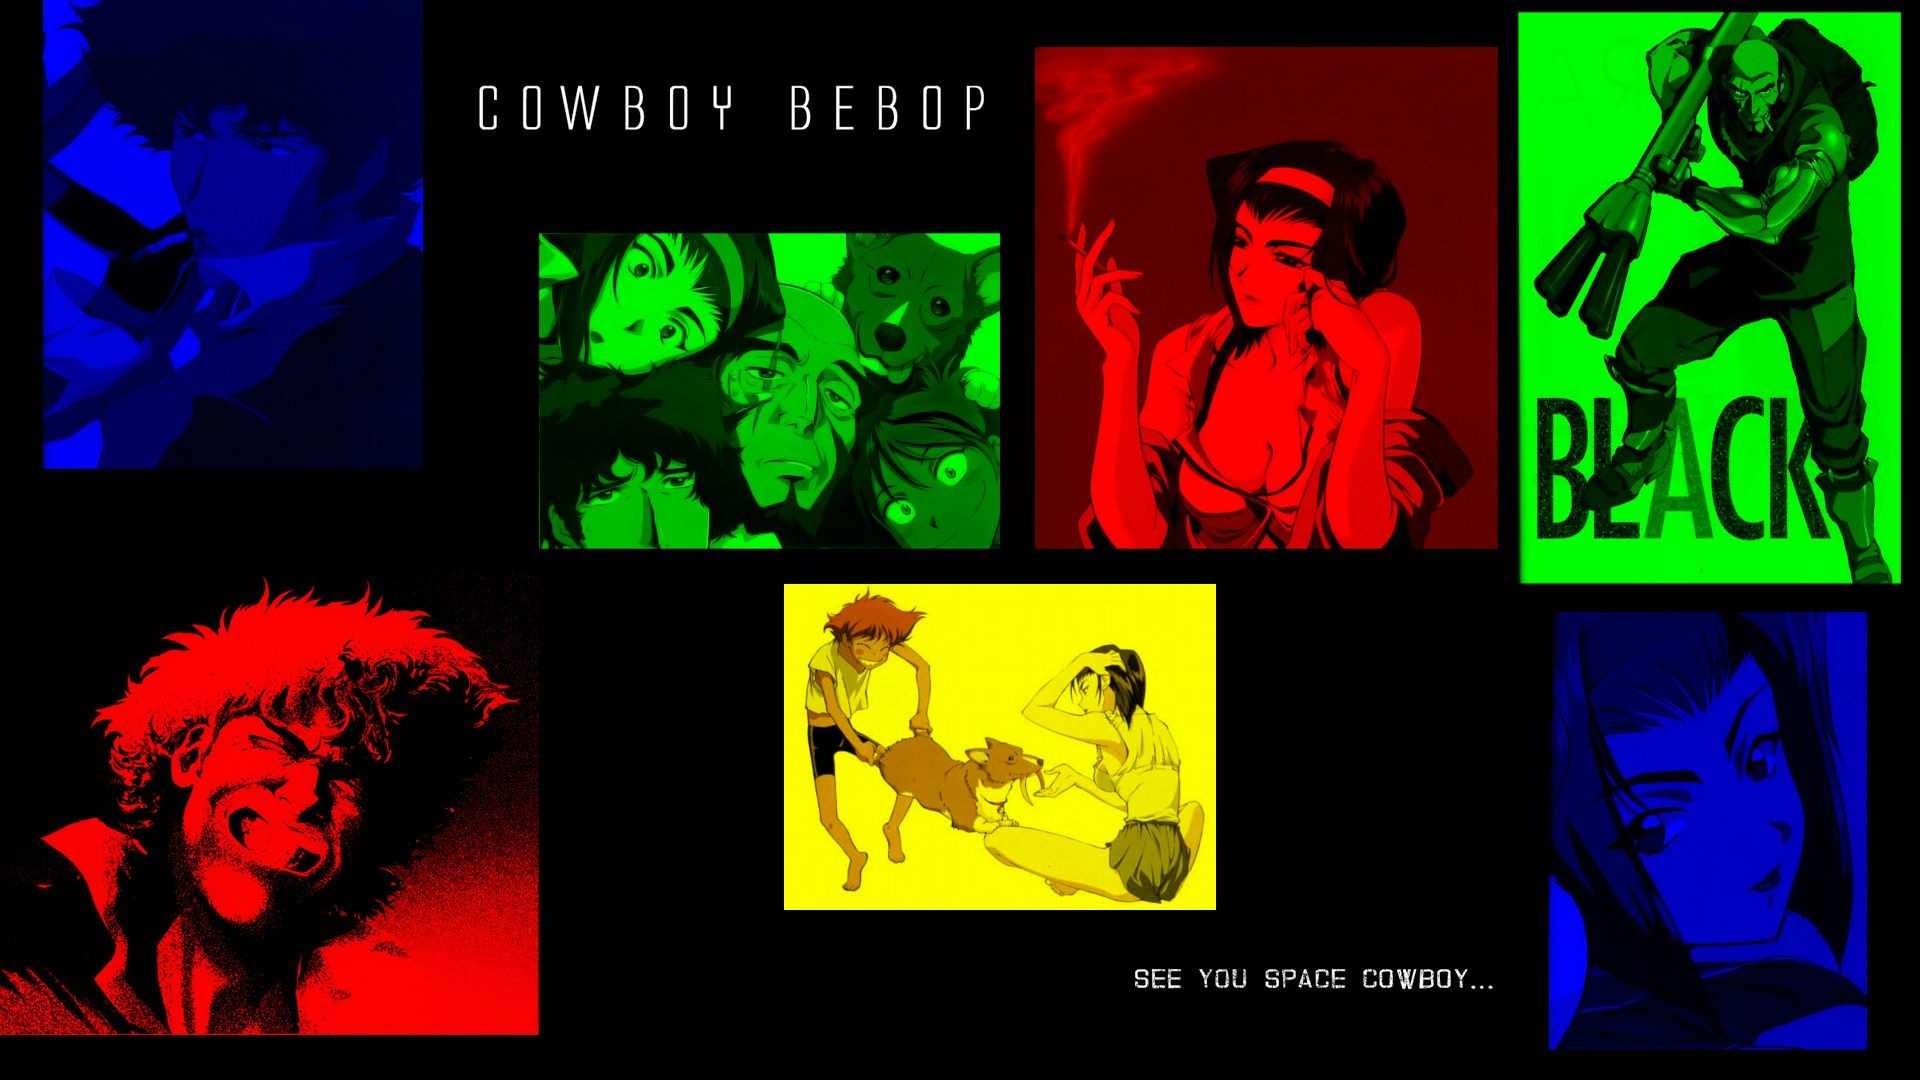 1920x1080 Cowboy Bebop Wallpaper collection. by TheClassyGentlemanMar 28 2014. Load 5  more images Grid view